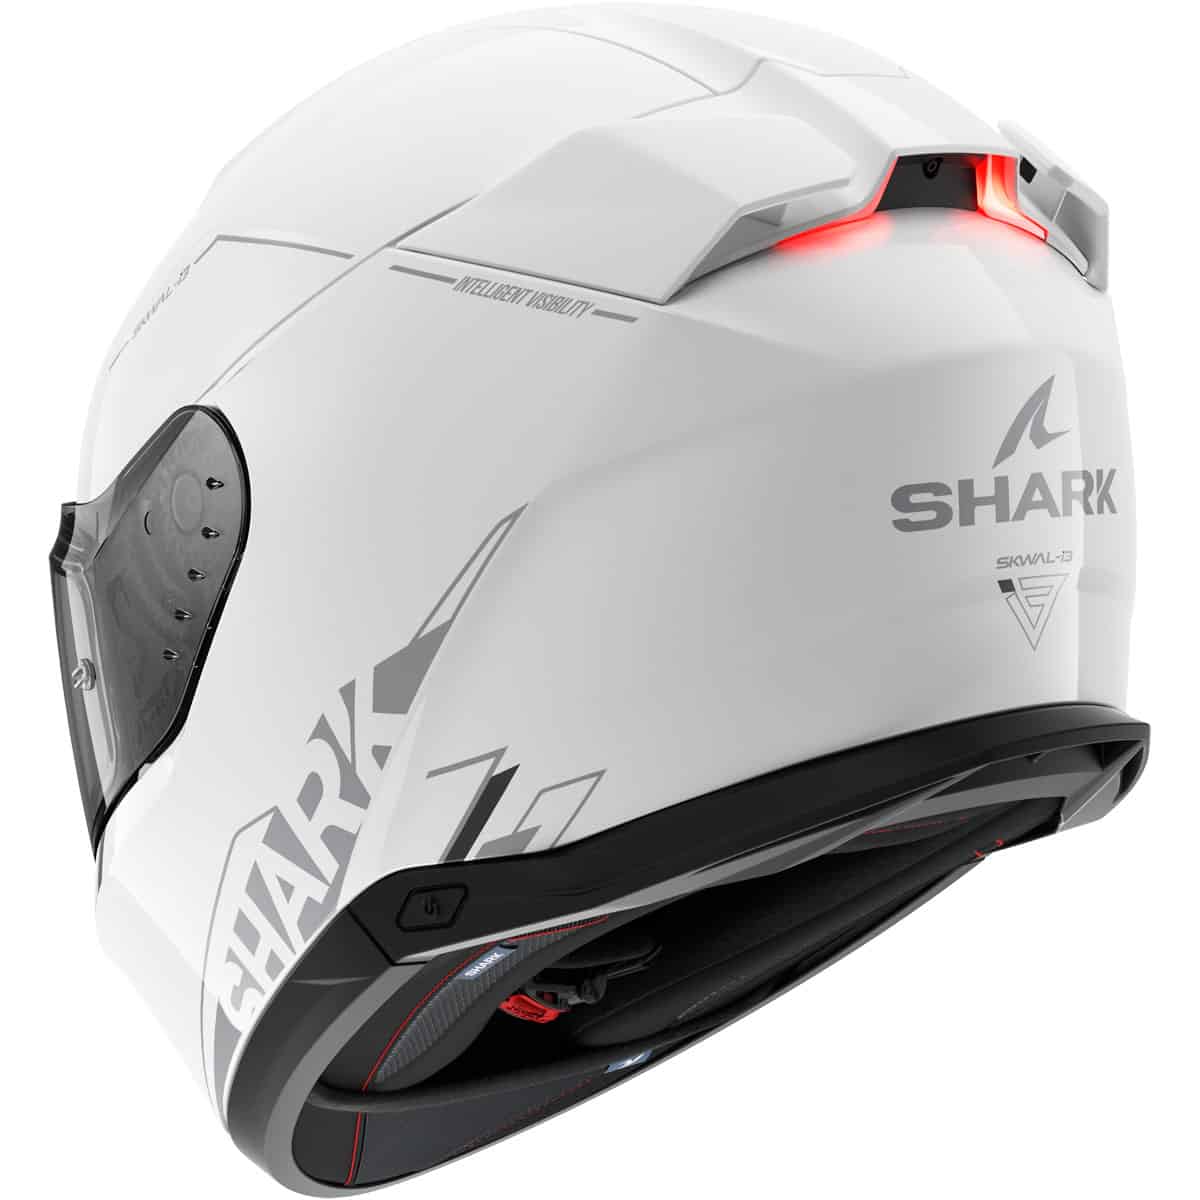 Shark Skwal i3: The first helmet with an integral brake light in white 3